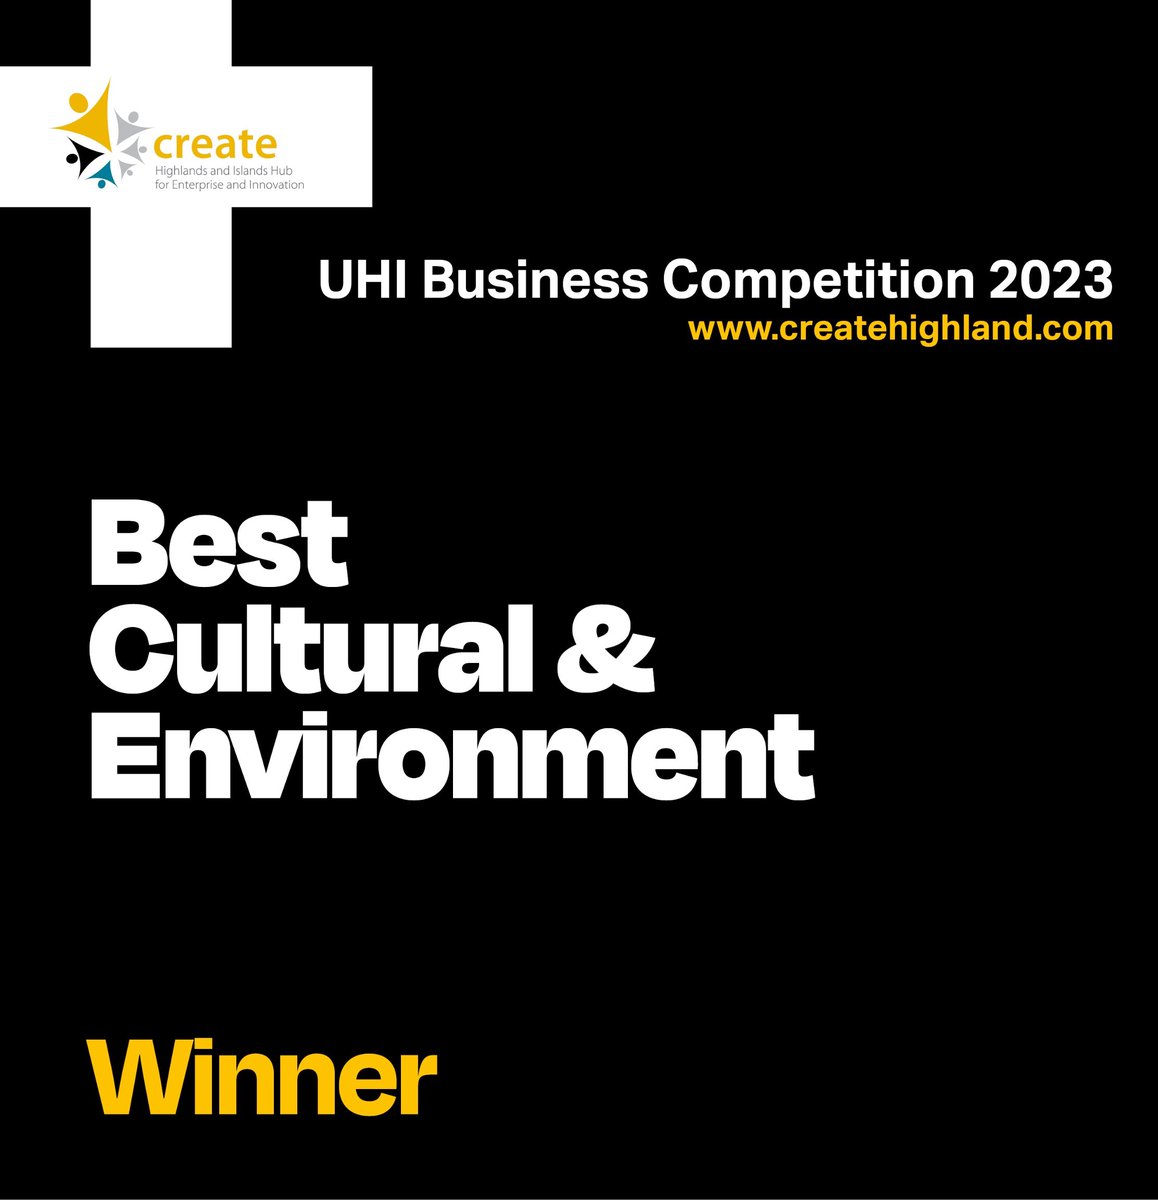 Congrats to our lead STEM Coordinator & Technologist, Jack Marley McIntyre for winning the 'Best Cultural & Environment' award at the UHI Business Competition. His winning concept is an innovative venue building & social enterprise called The Rose Street Roundhouse! #UHISTEM #UHI